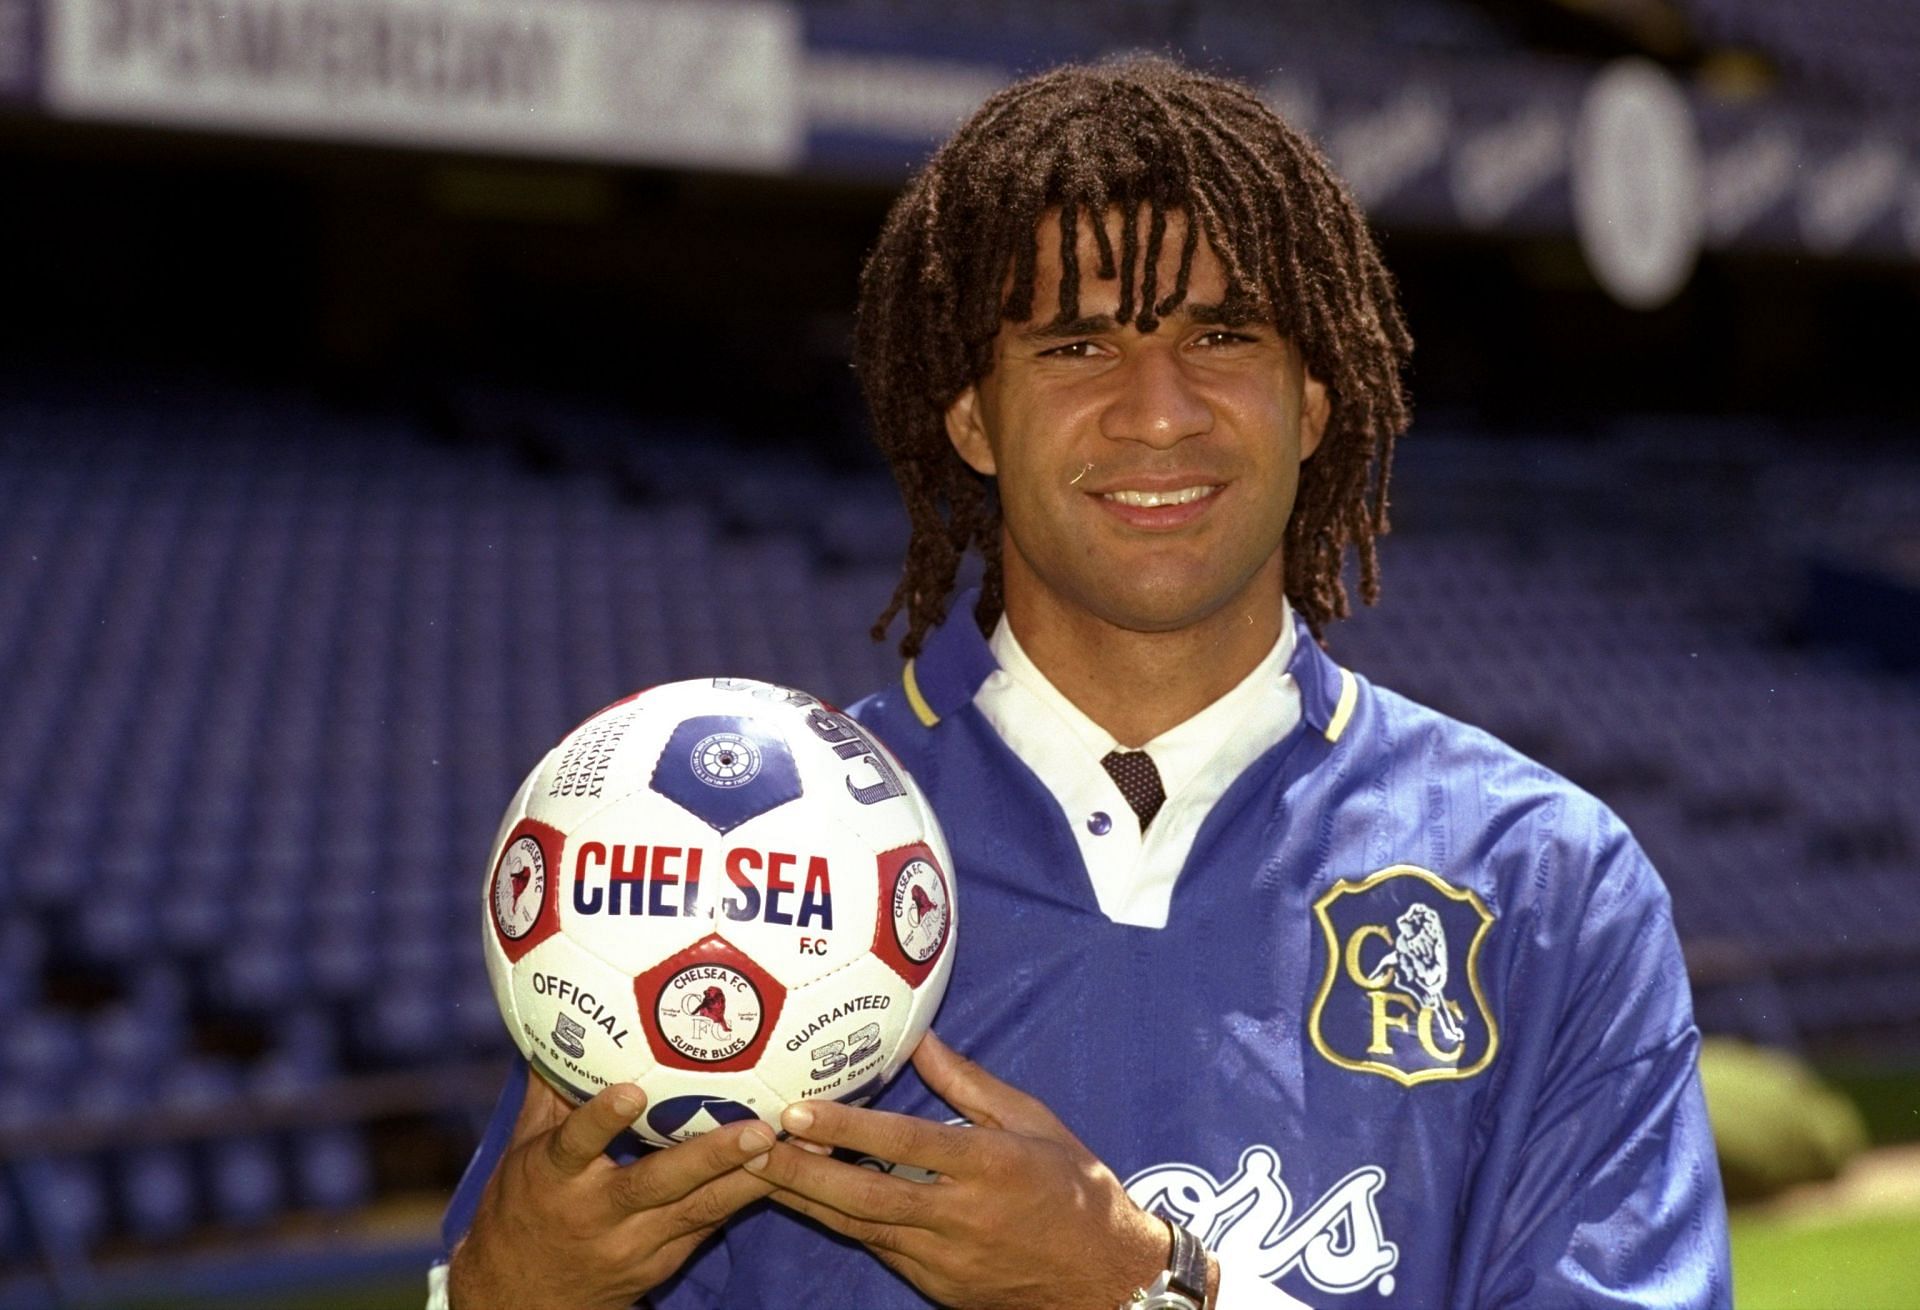 Ruud Gullit in action of Chelsea